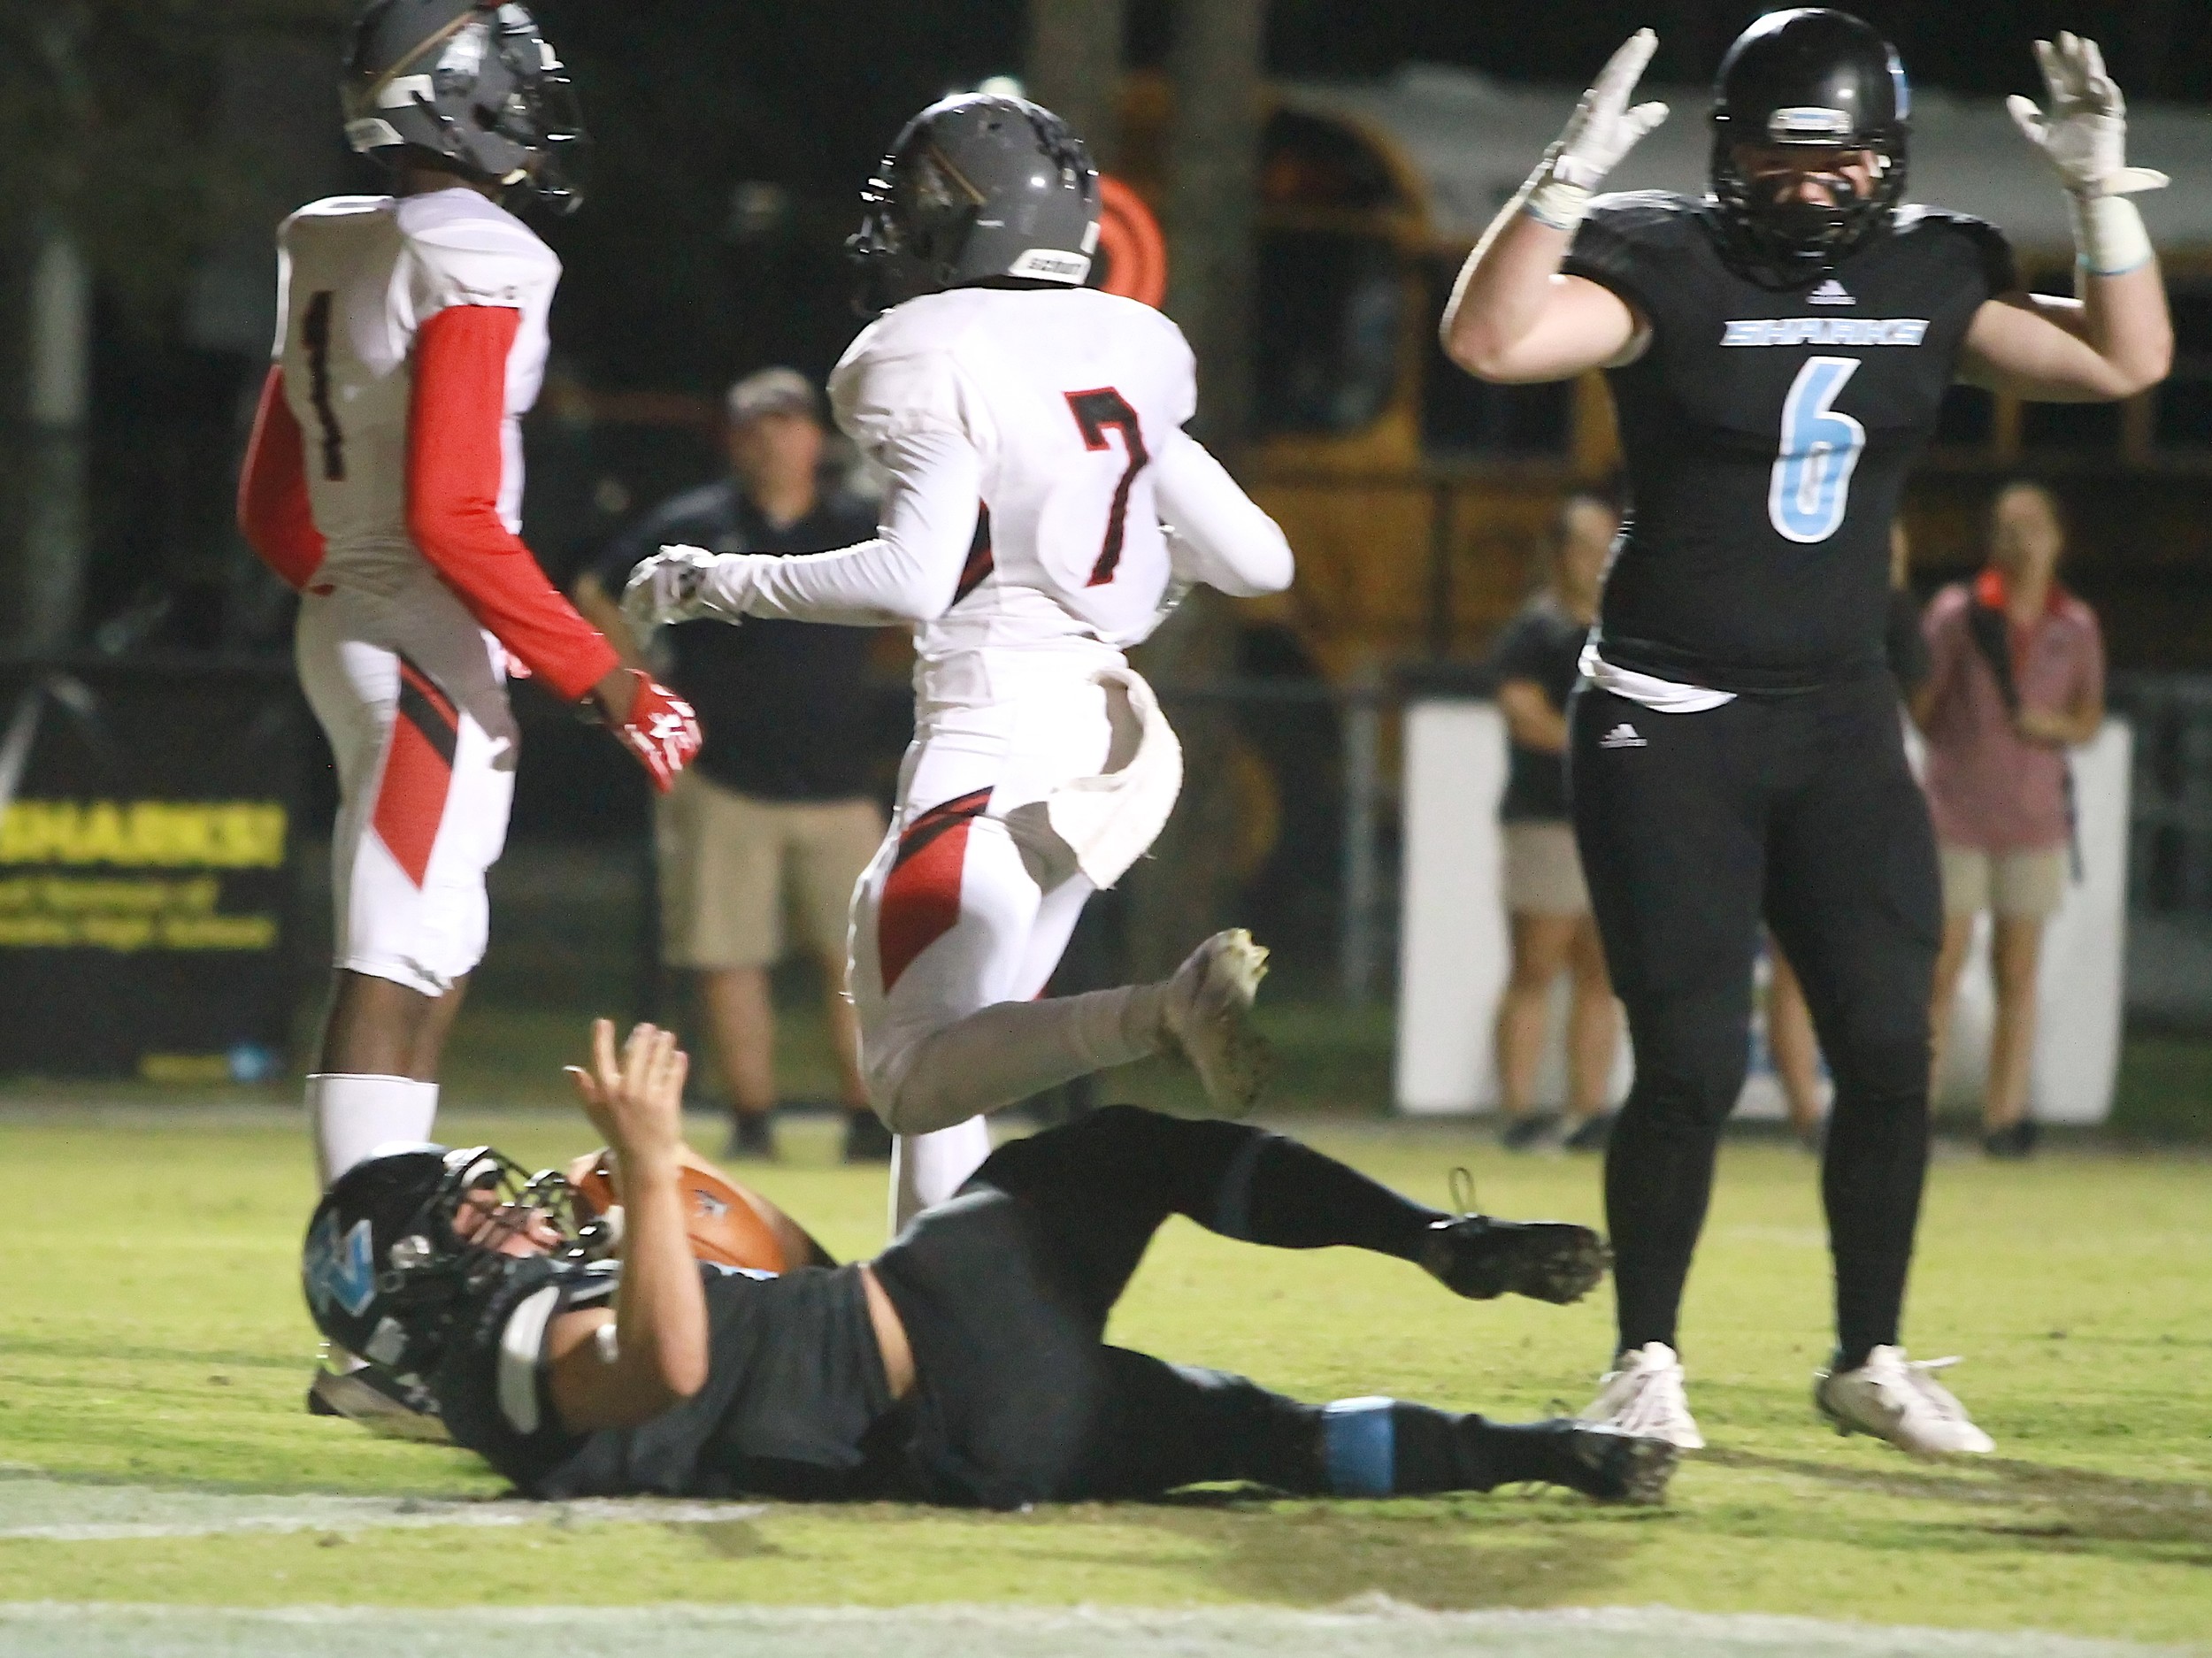 Hal Swan scores for the Sharks as #6 Gibson Pardue celebrates